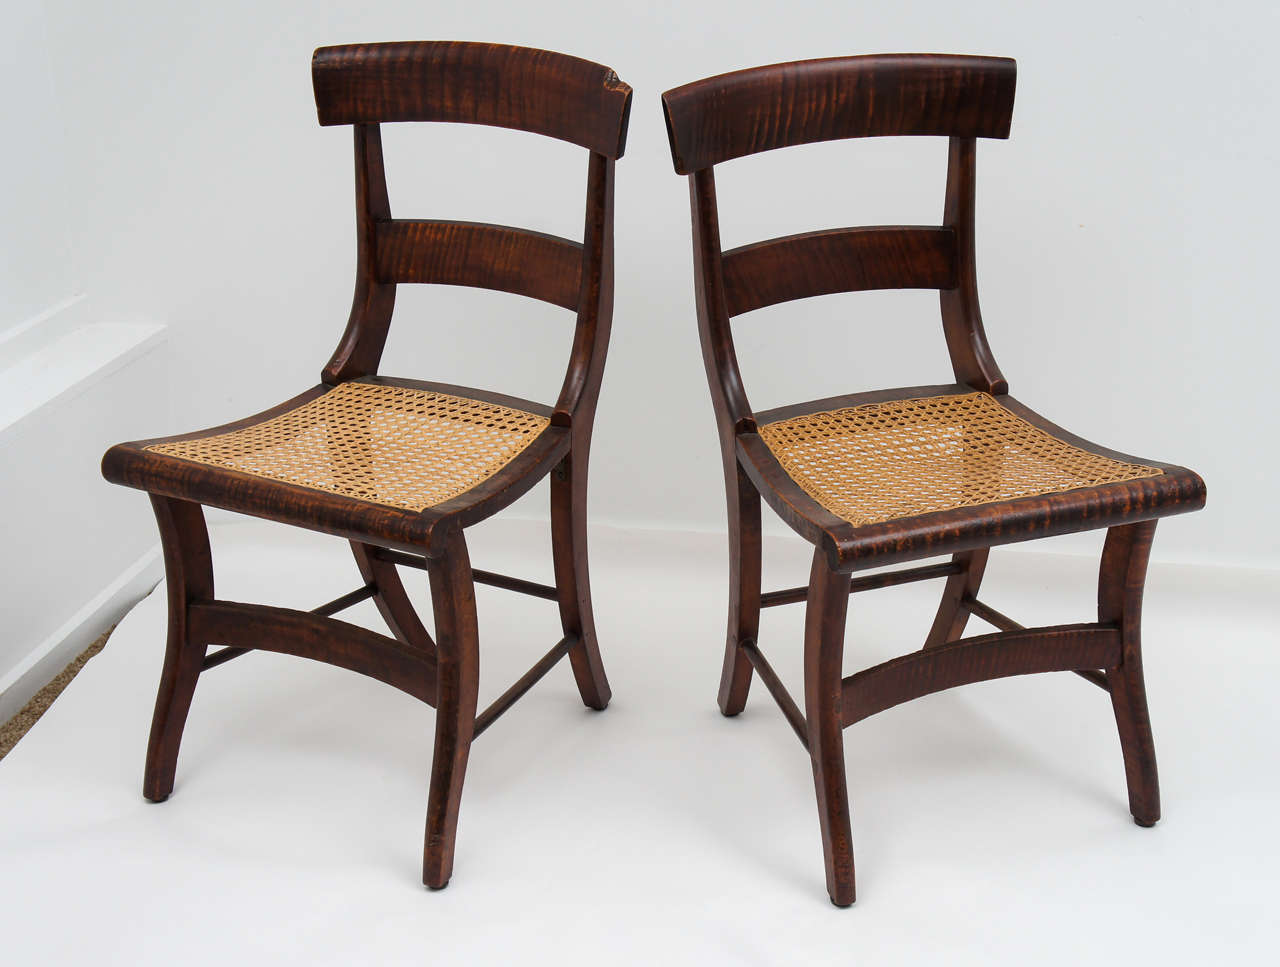 Set of six structurally sound tiger maple dining chairs, last quarter 19thC. As noted in the photos, we have intentionally left the imperfections intact, reflecting the years of enjoyment these chairs have provided.